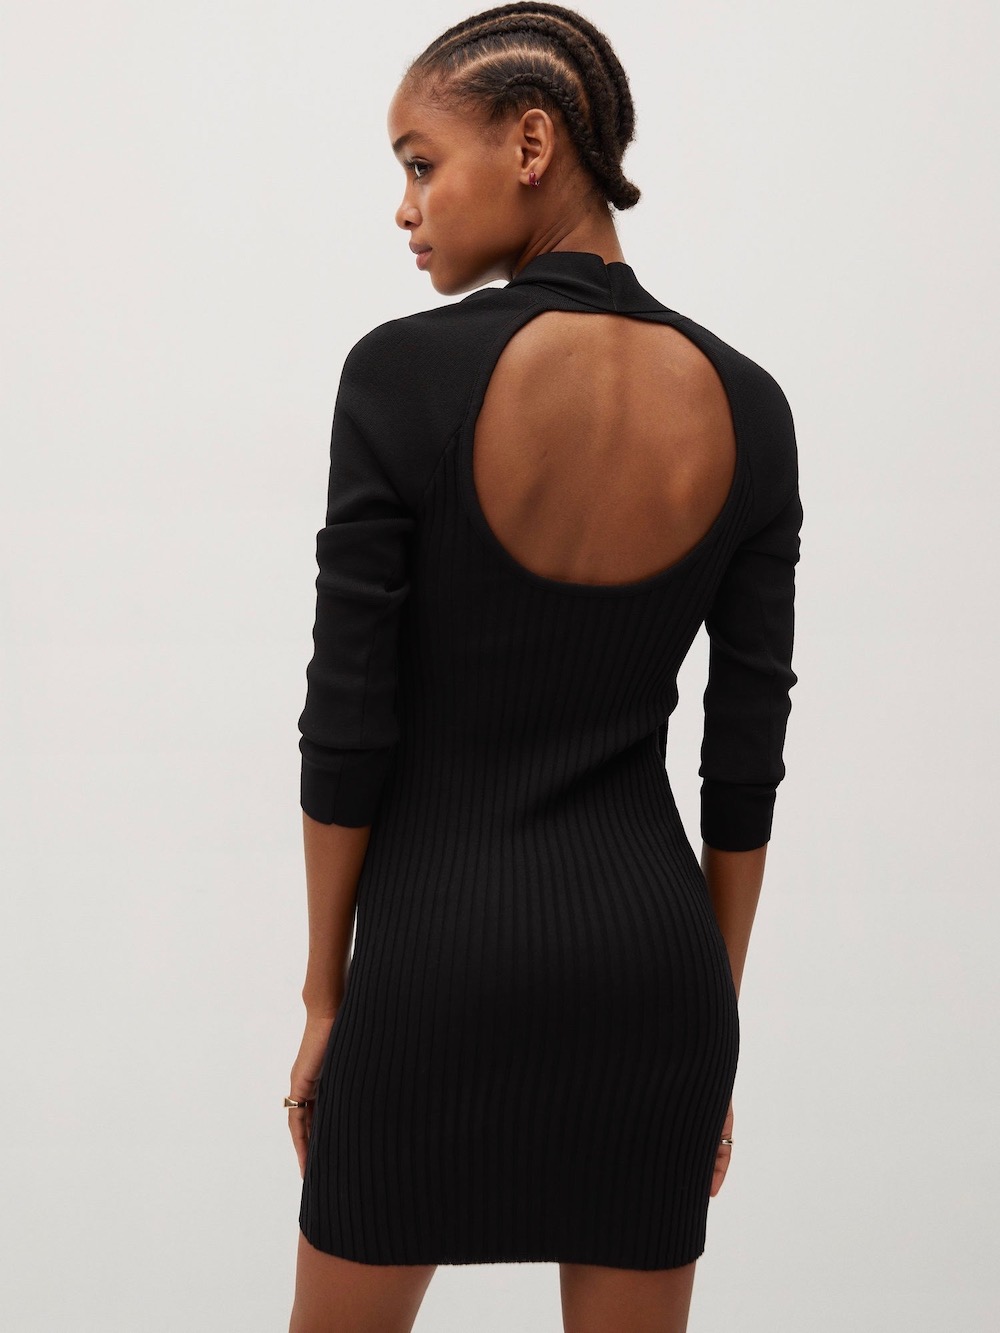 Open-Back Dresses You Can Wear Now and Later - theFashionSpot